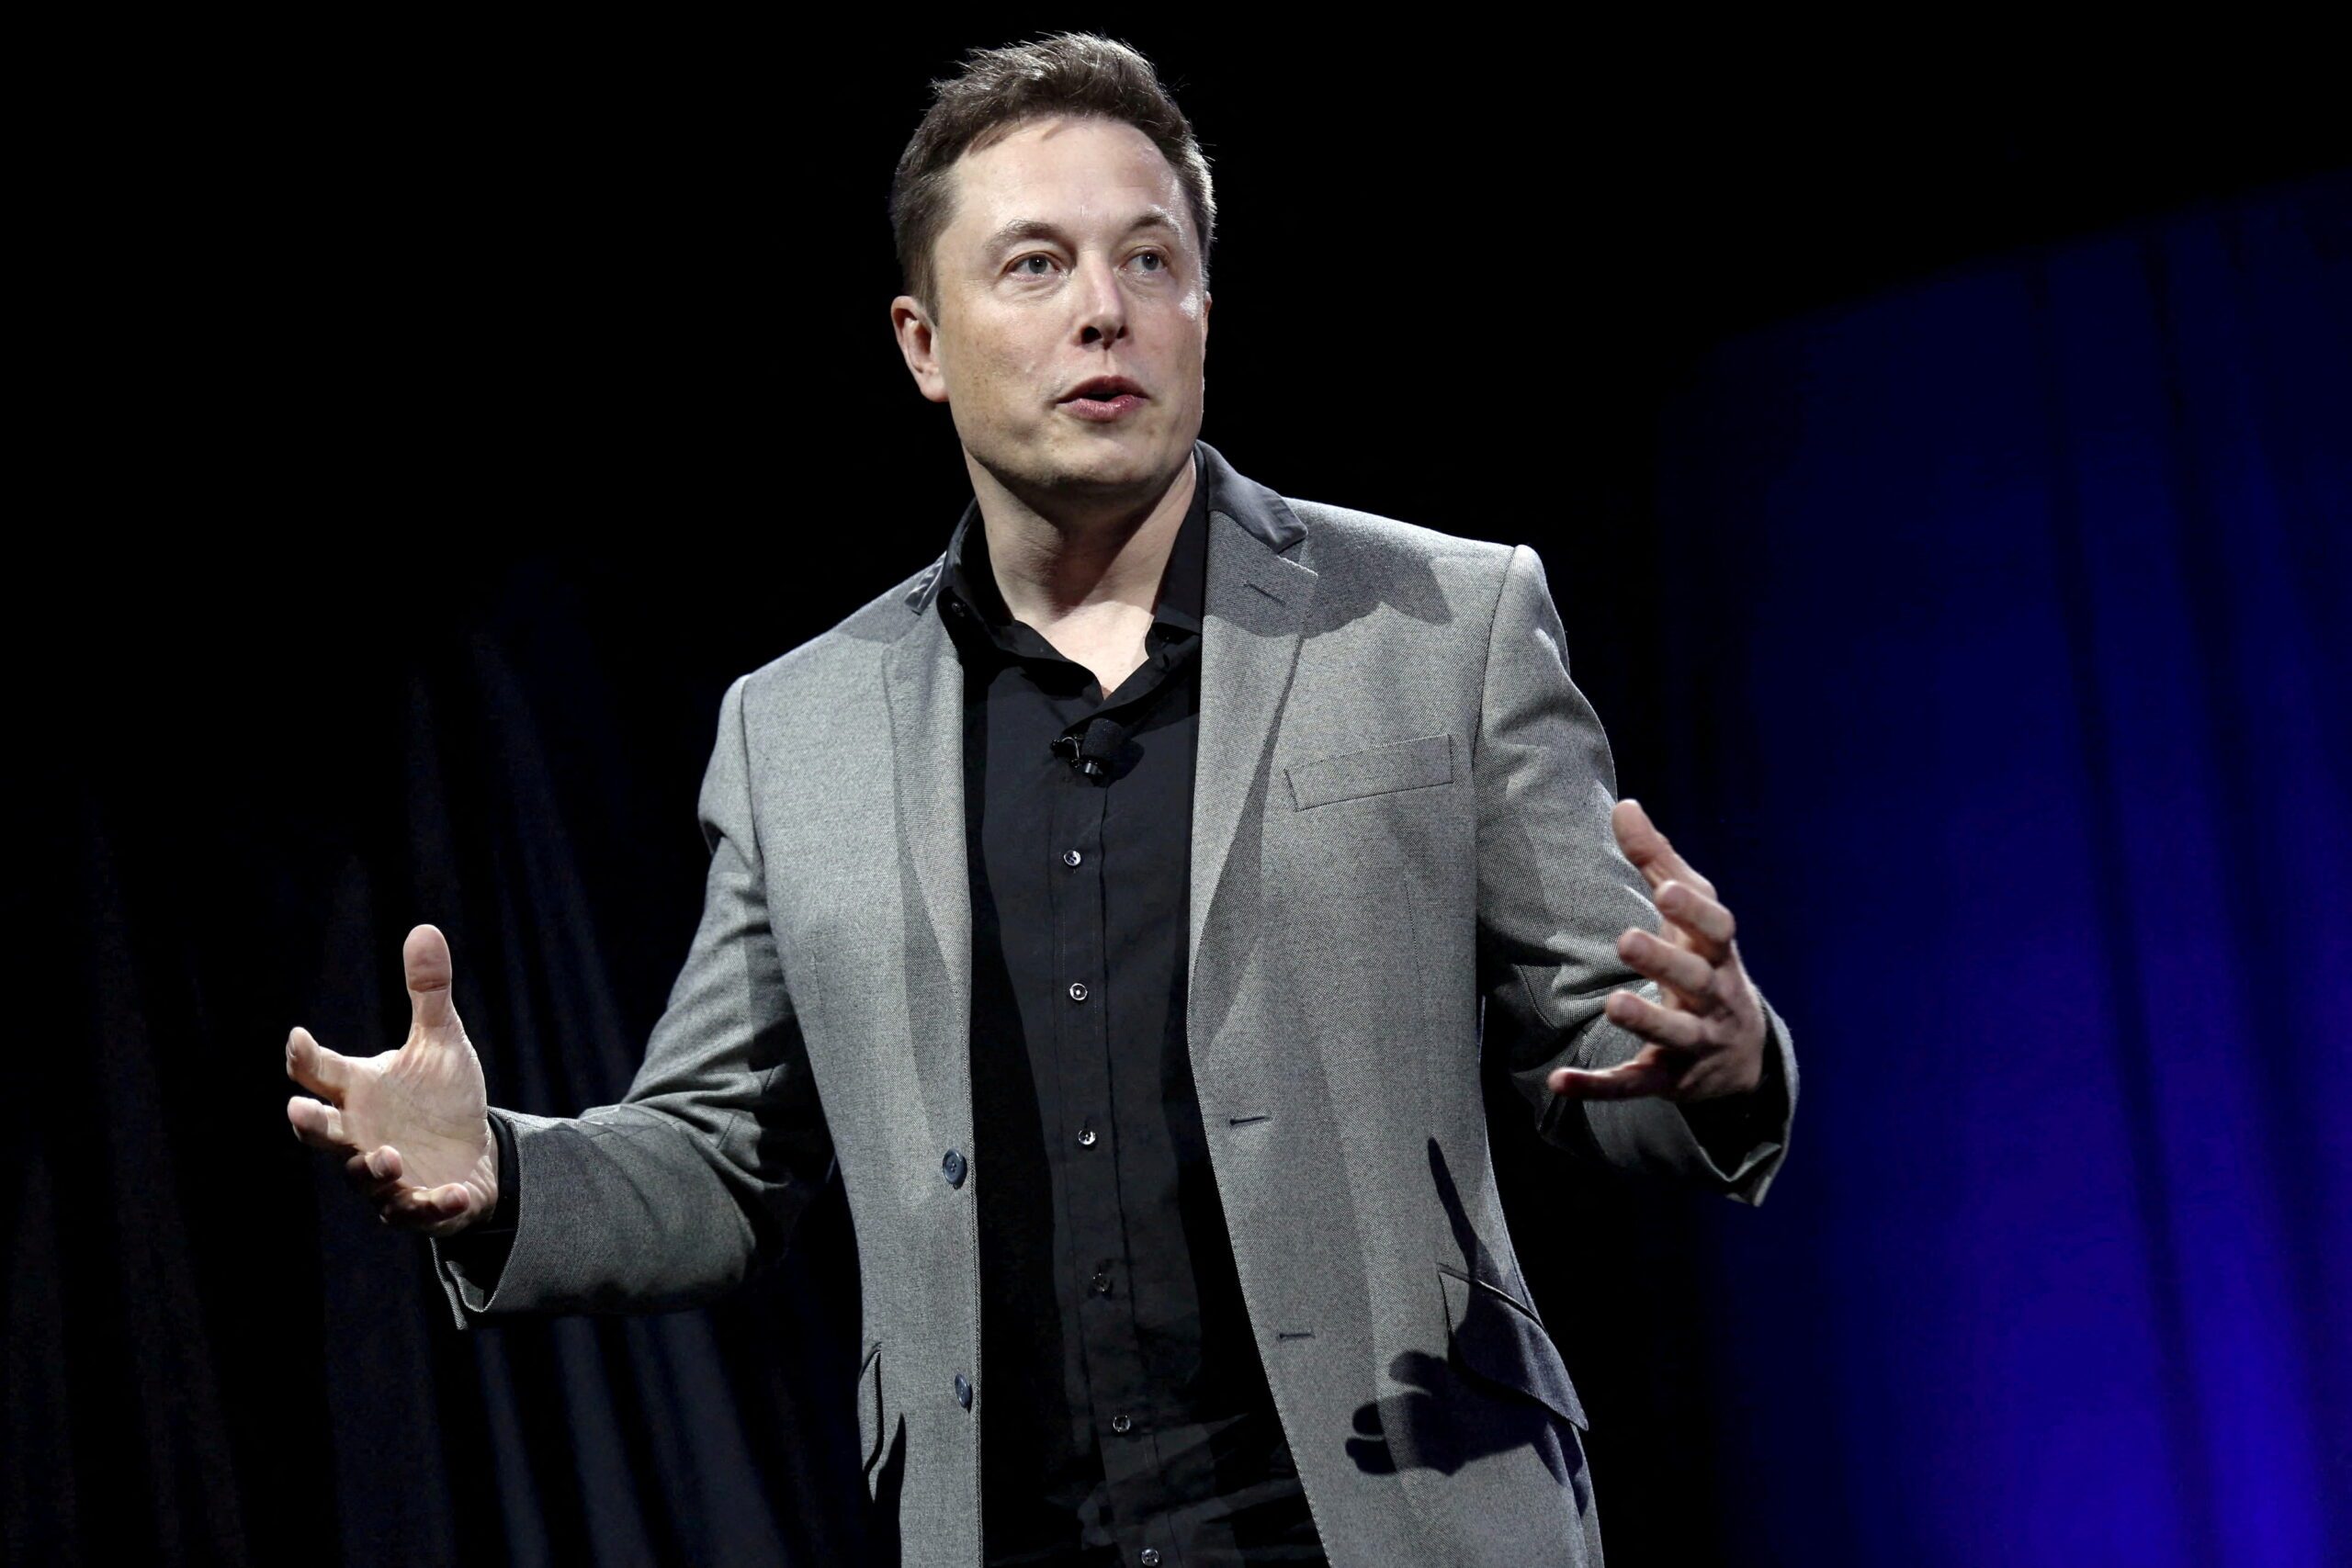 What will Elon Musk’s ownership of Twitter mean for ‘free speech’ on the platform?